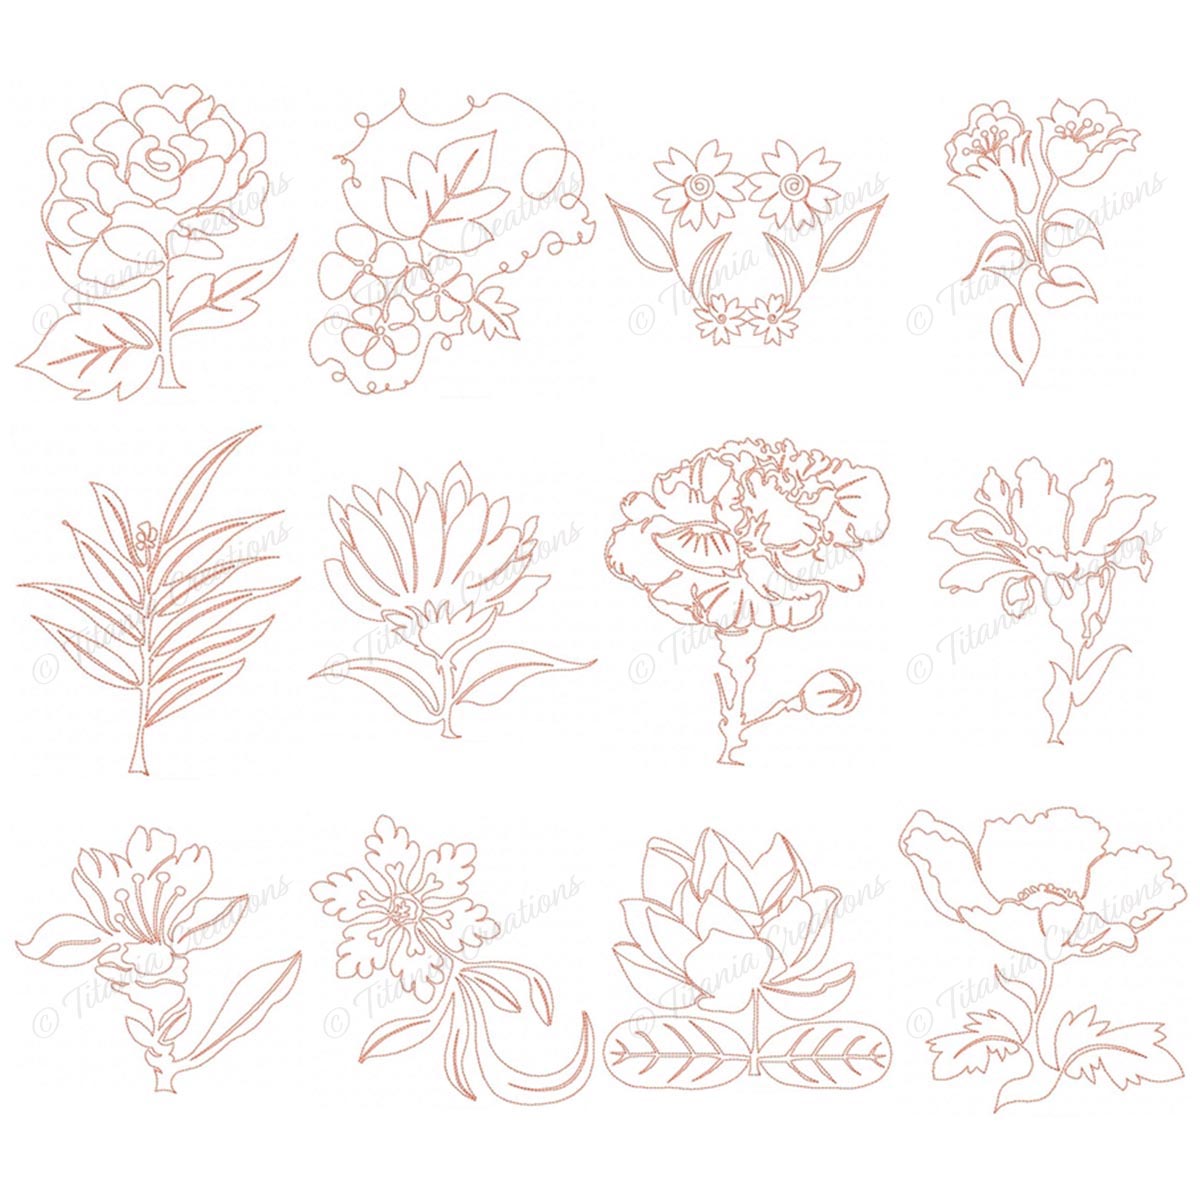 Continuous Line Flowers Set of 12 in Sizes 4x4 - 8x8